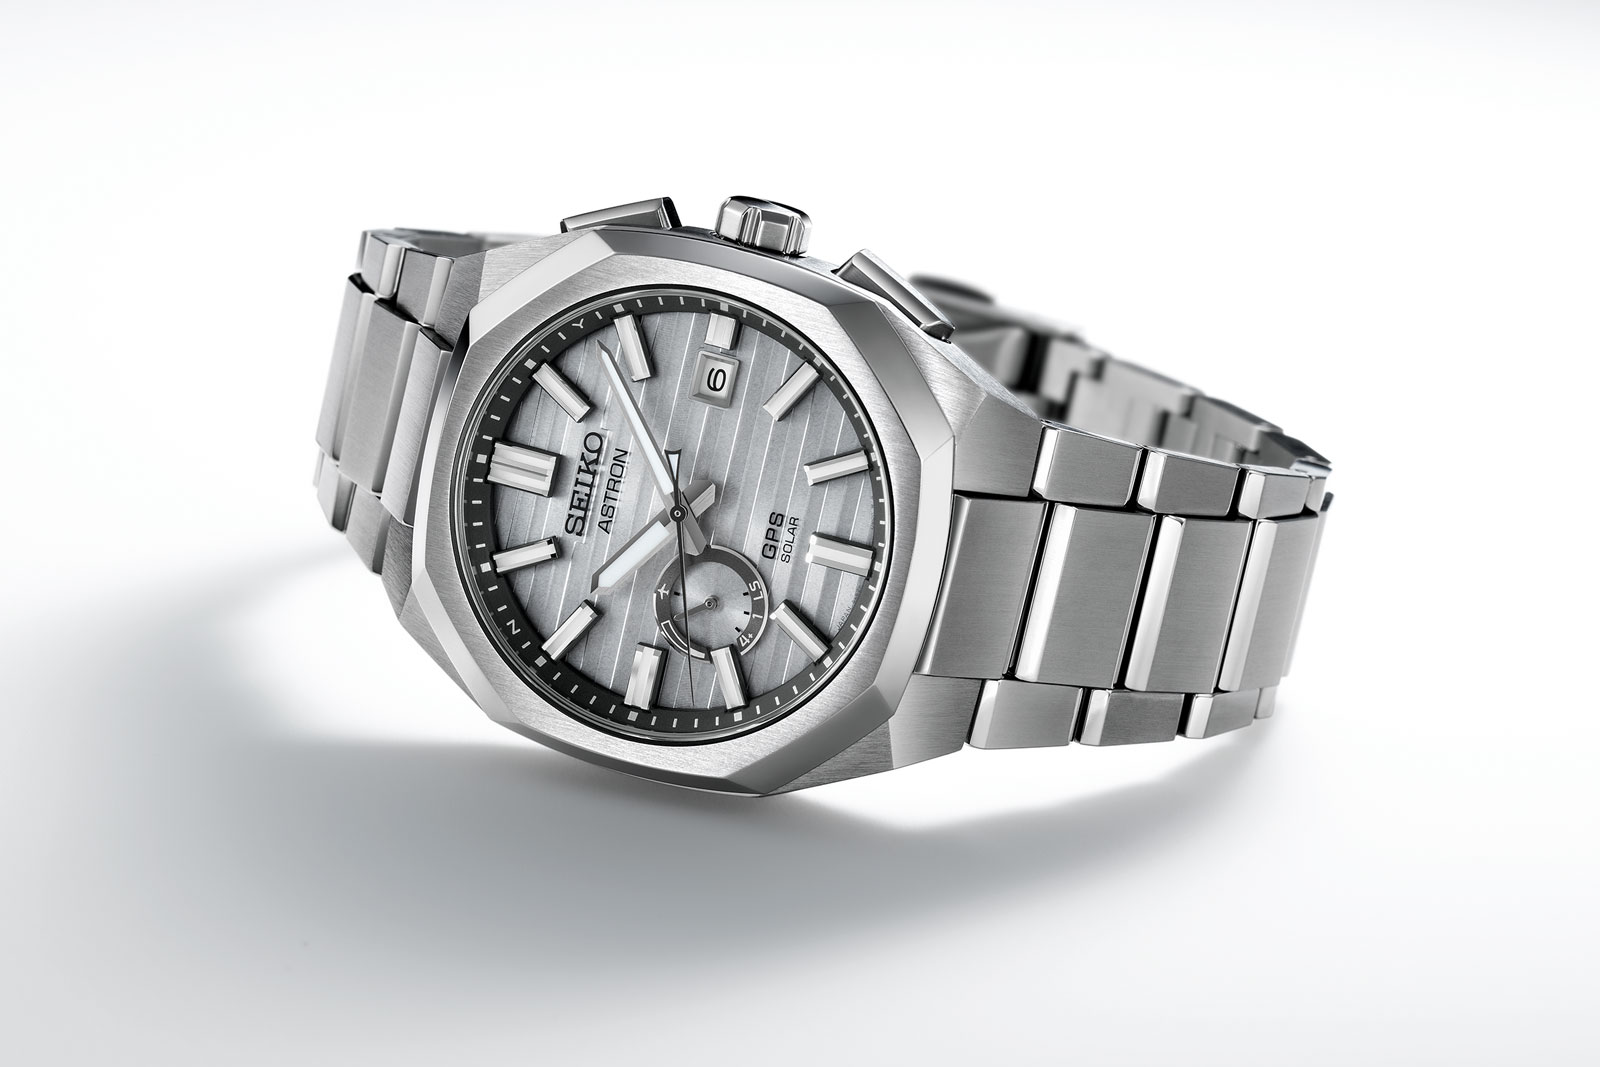 Seiko Introduces the Astron Solar, Redesigned and Sleeker | Watches